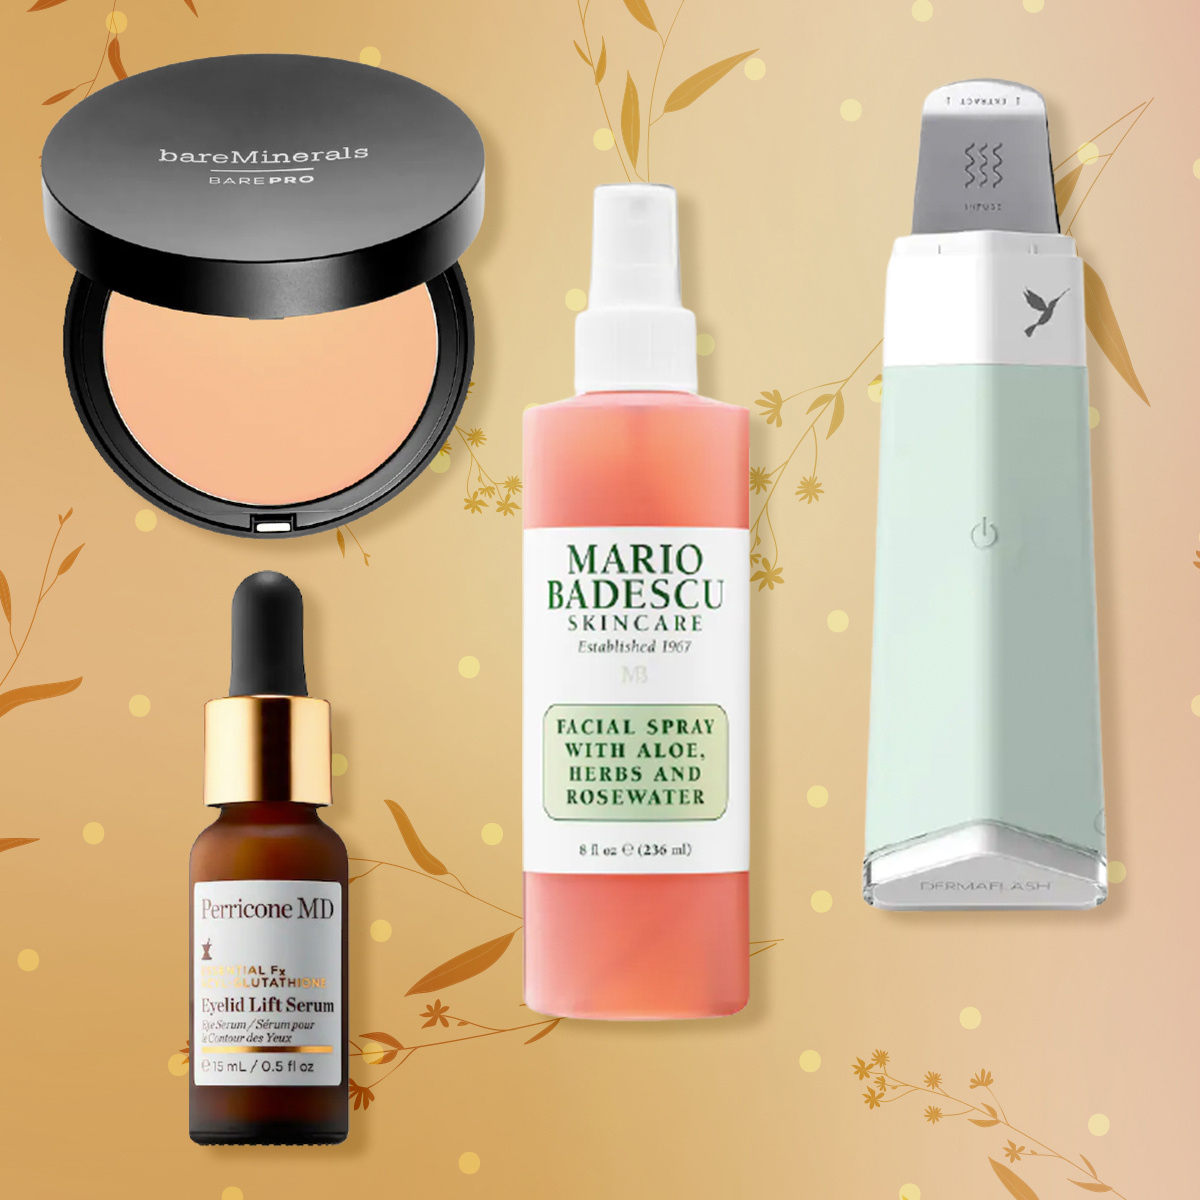 Ulta Days Of Beauty: Get 50% Off Mario Badescu, Perricone MD & - Online